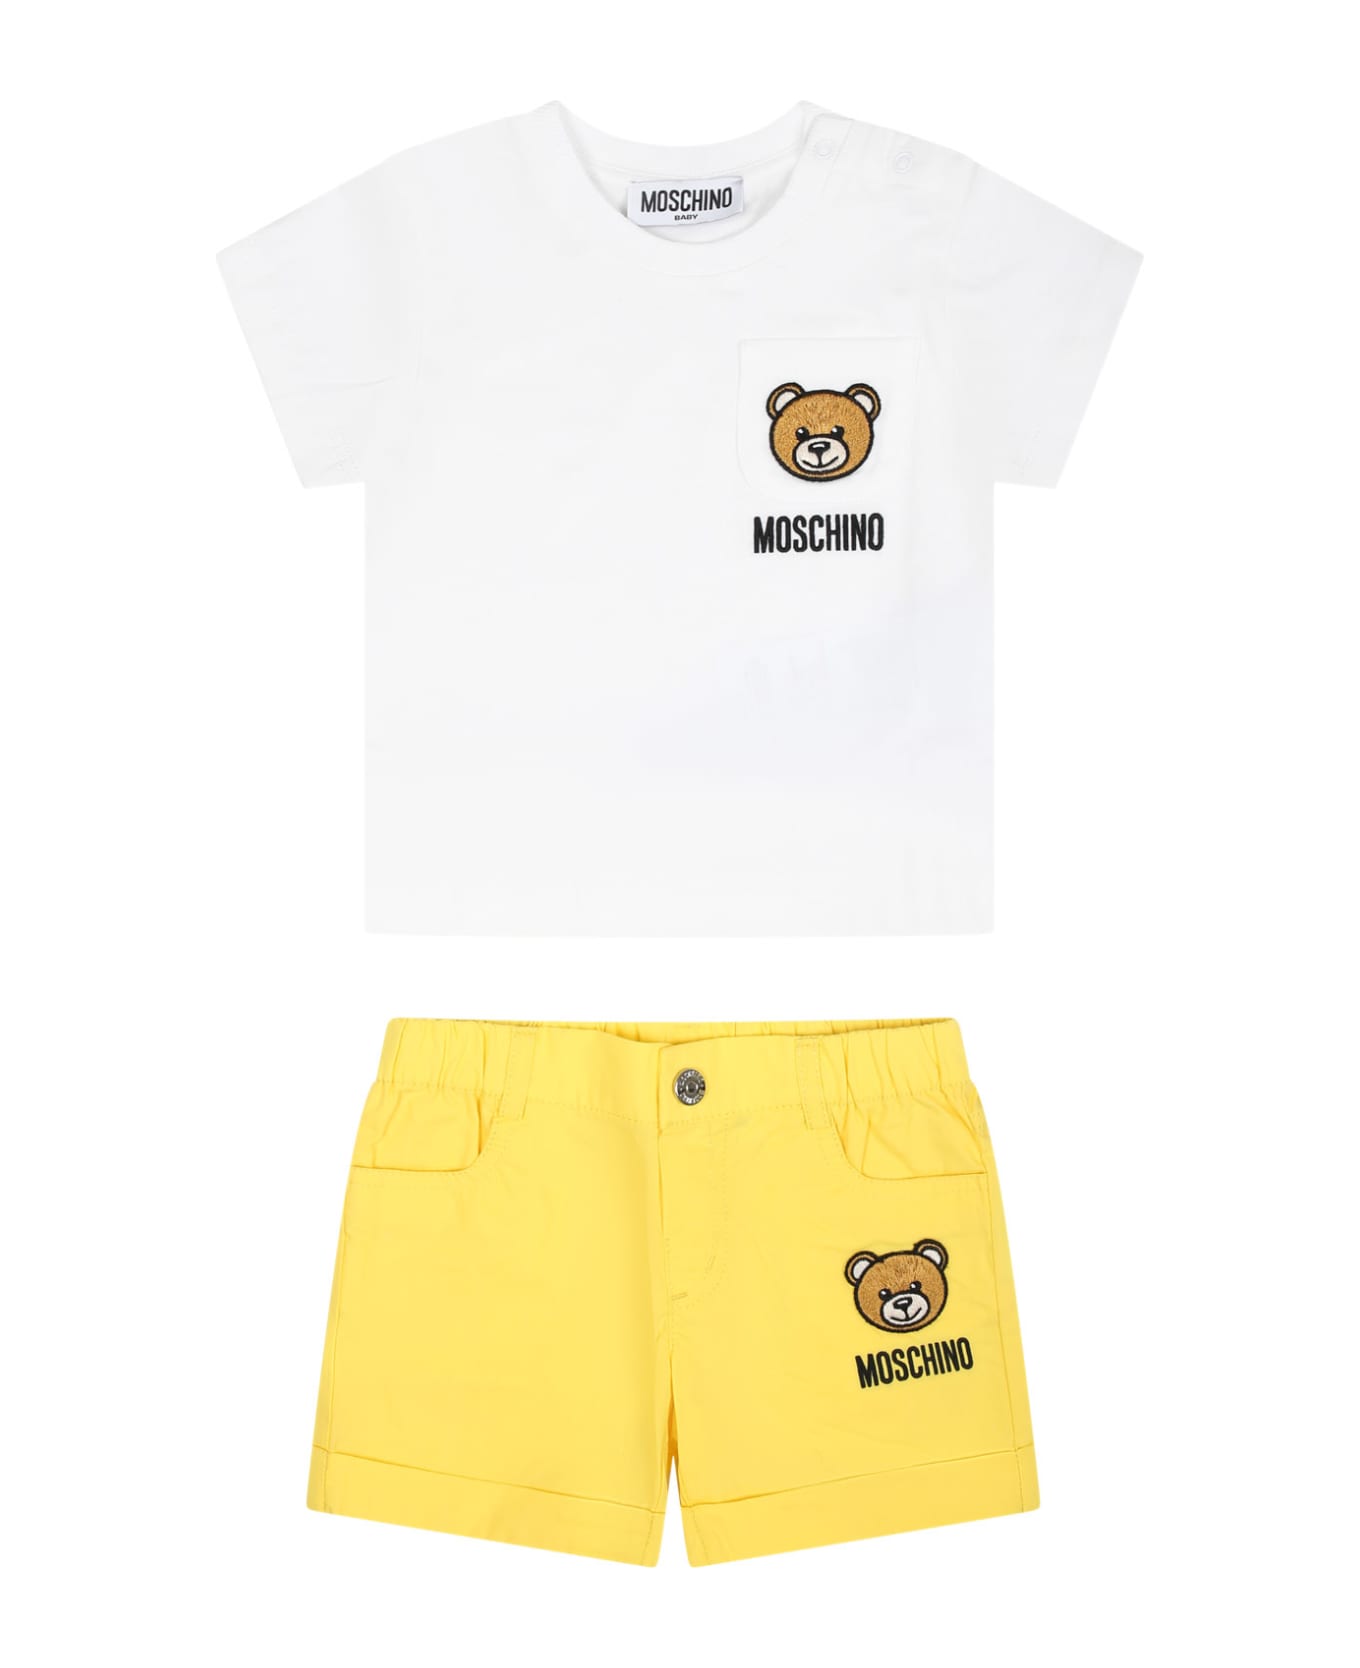 Moschino Multicolor Sports Suit For Baby Kids - Multicolor